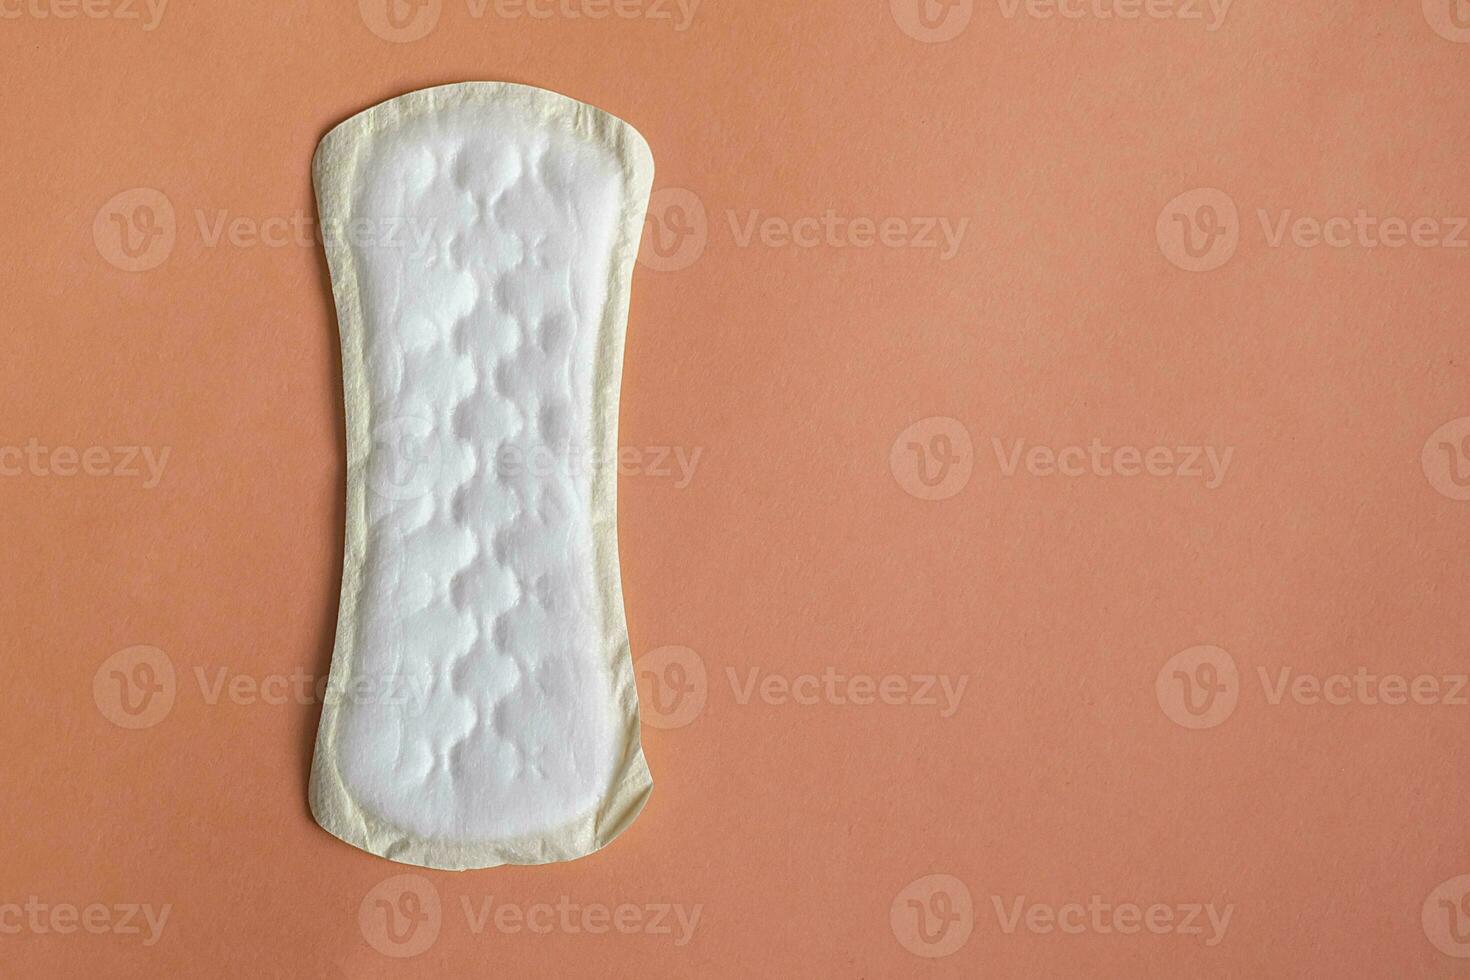 Sanitary napkins or menstrual pad on Pantone colored background. Copy space. photo